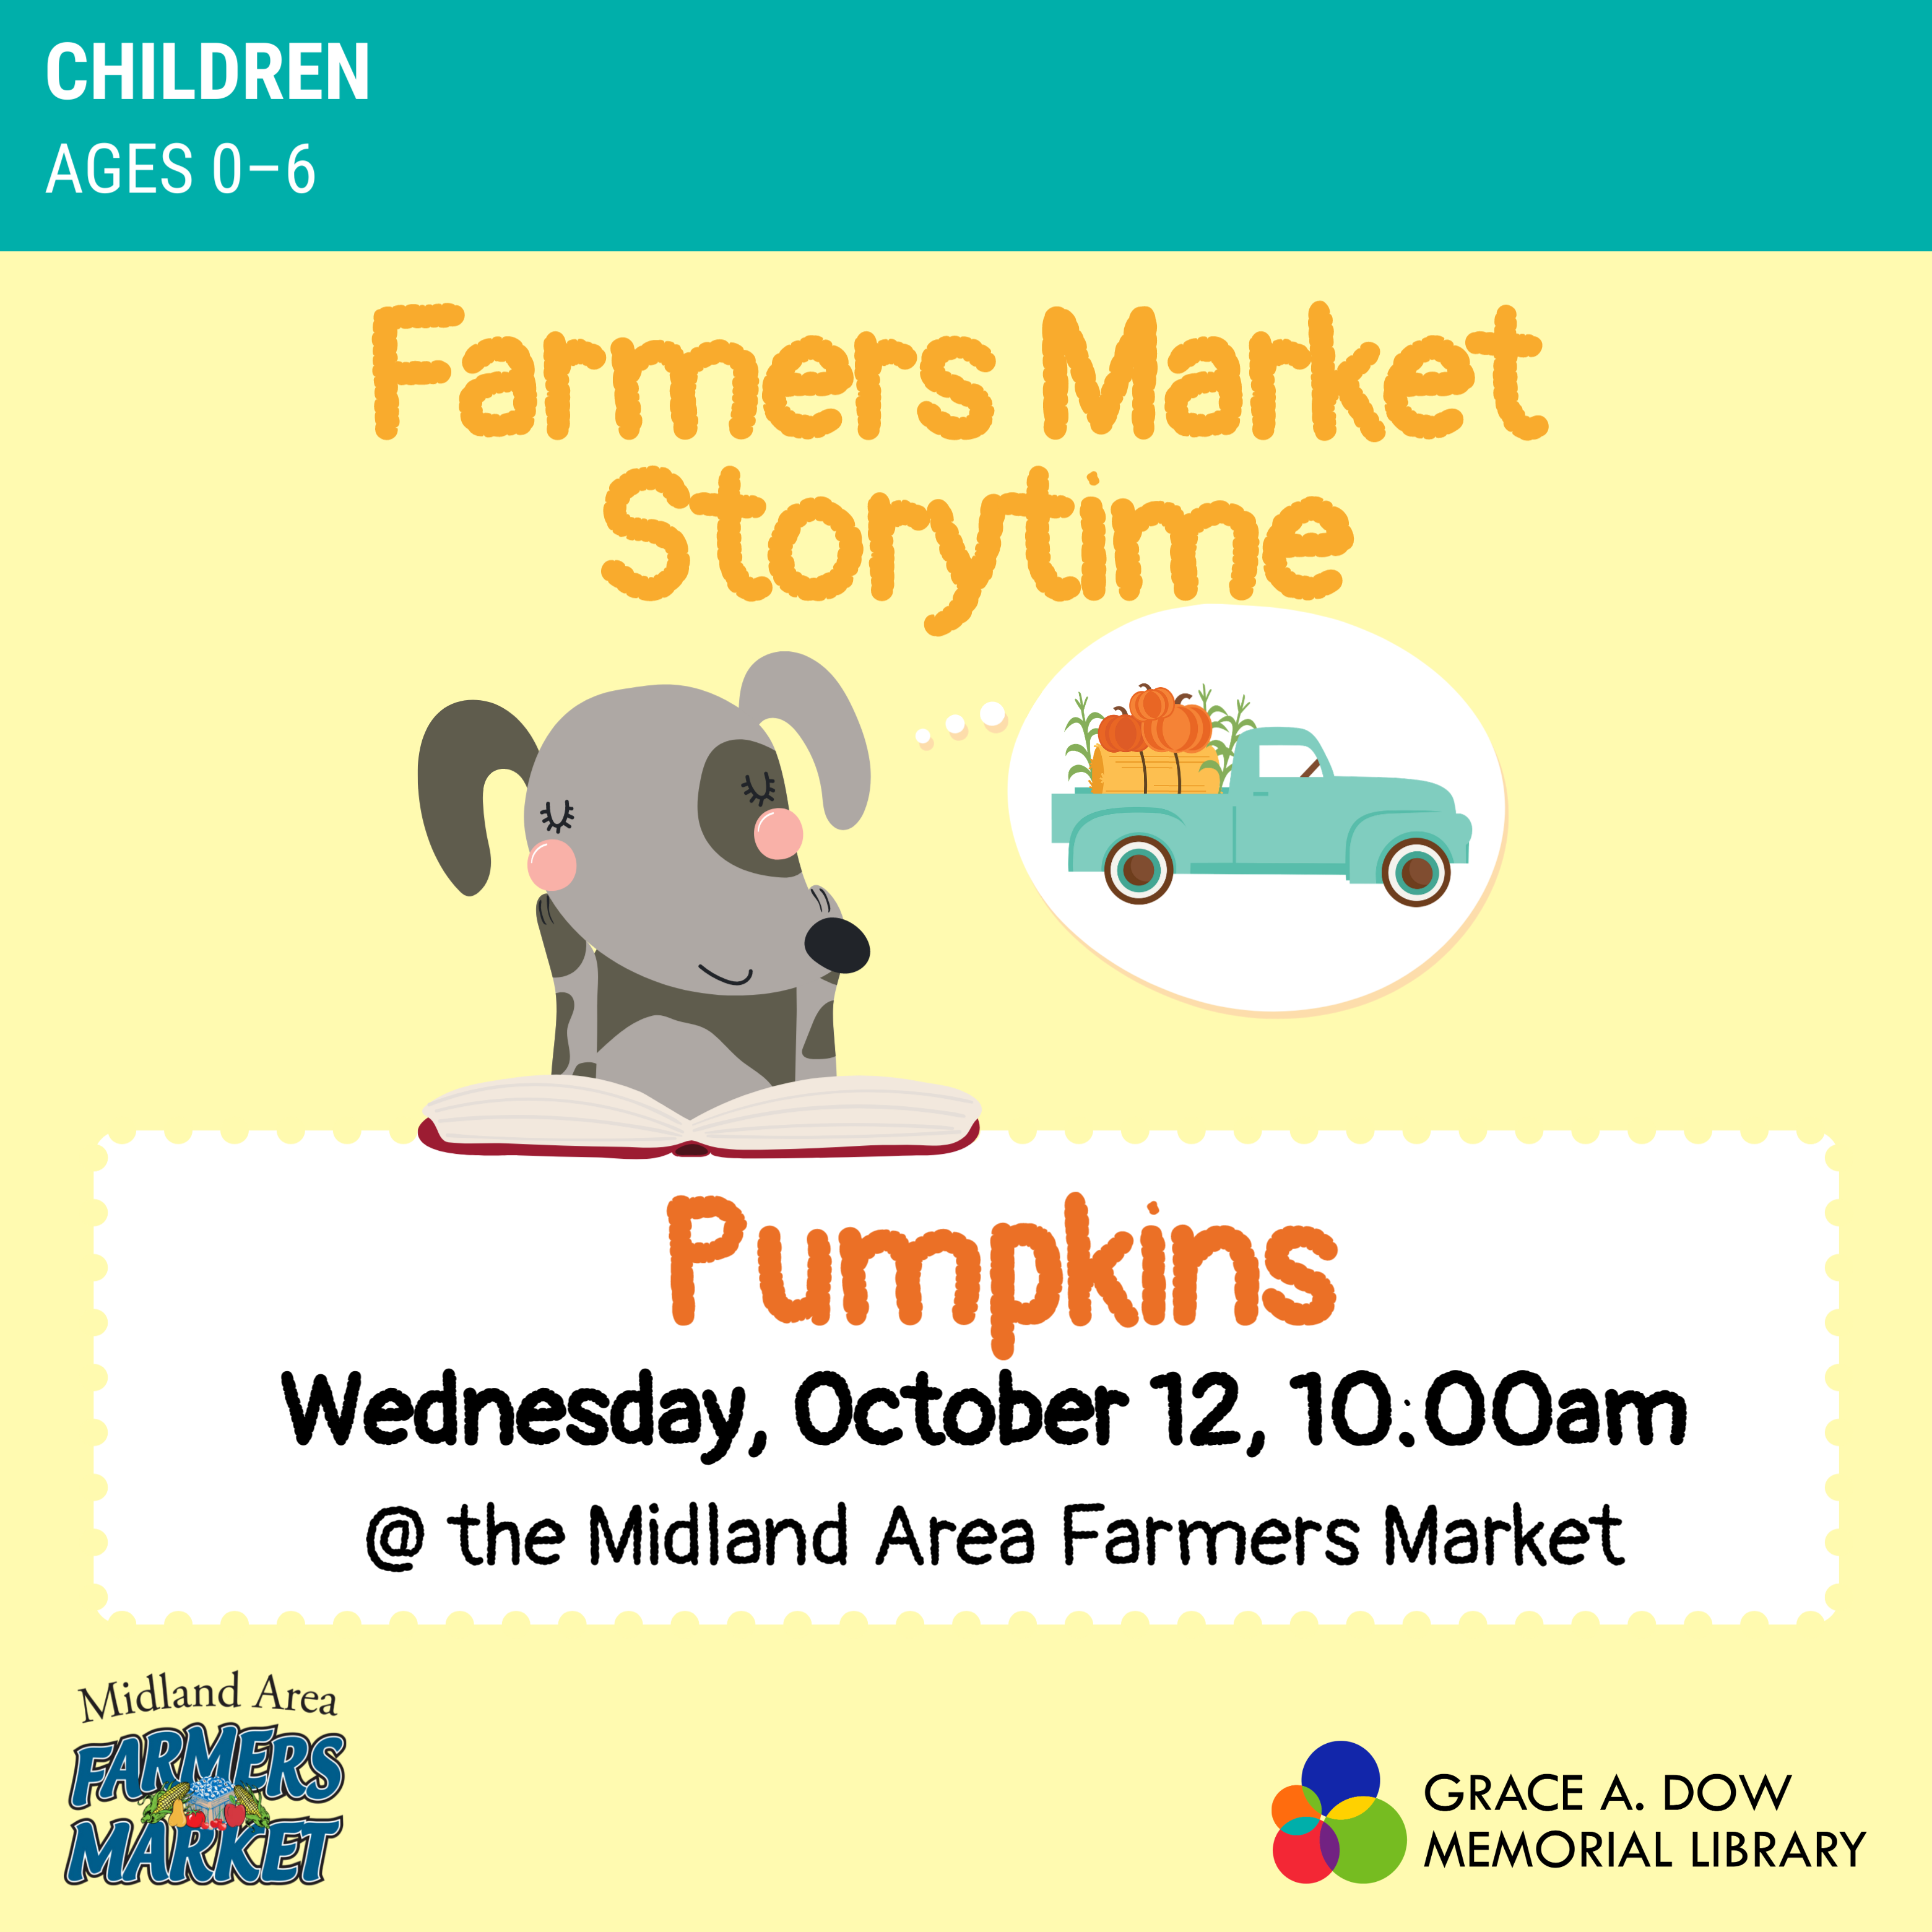 farmers market storytime at dow diamond, october 12 at 10am